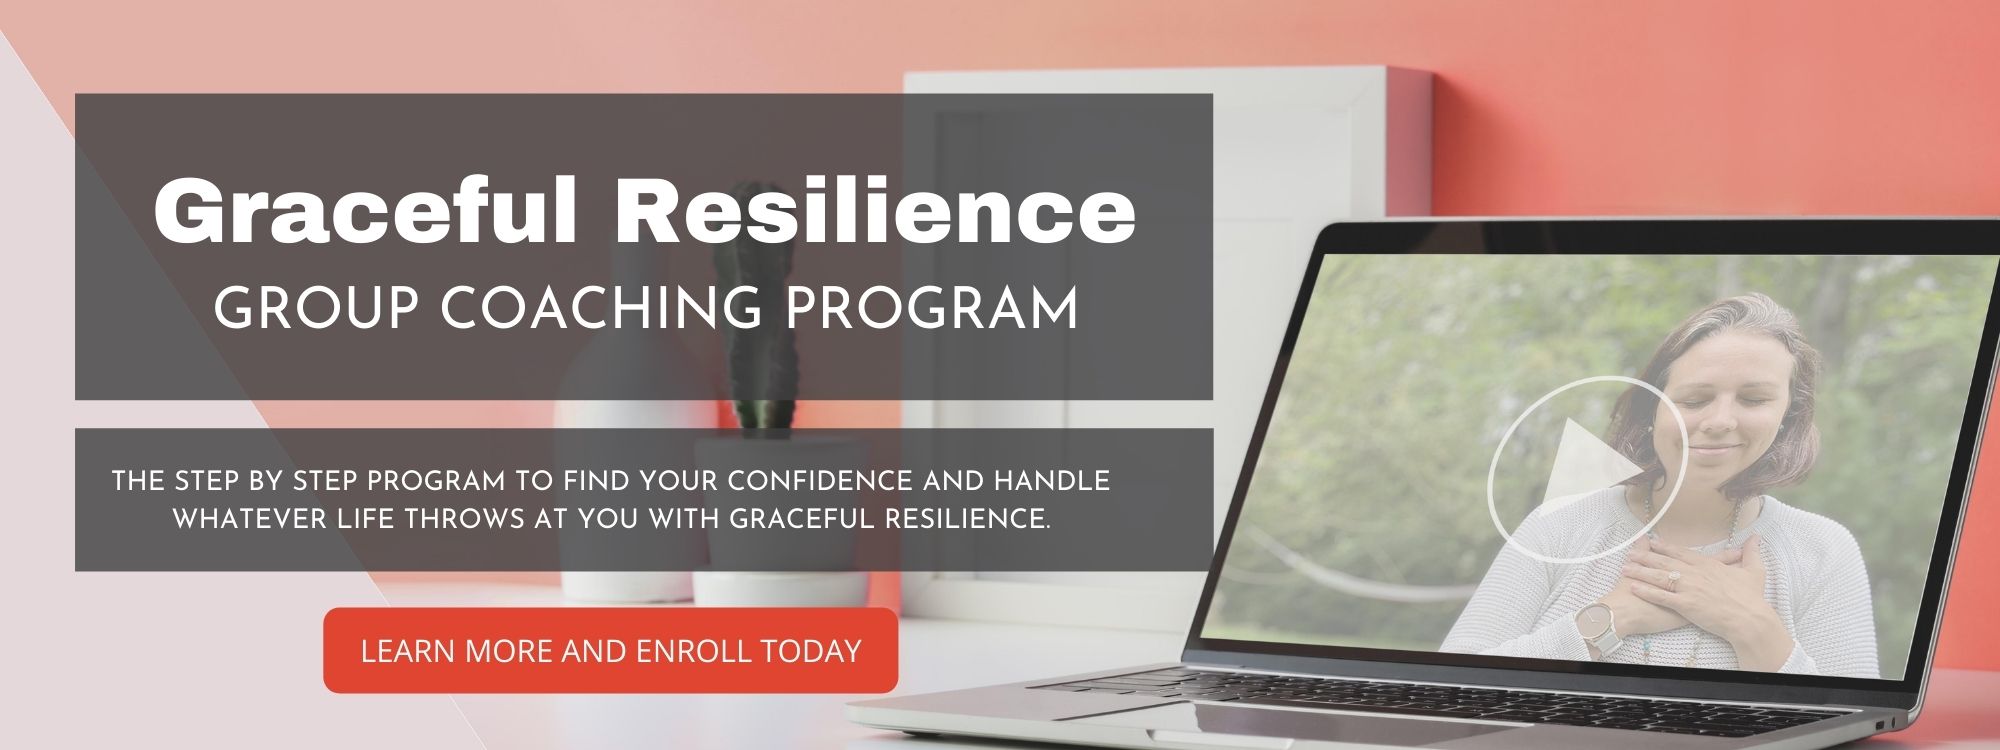 graceful resilience stress and anxiety coach